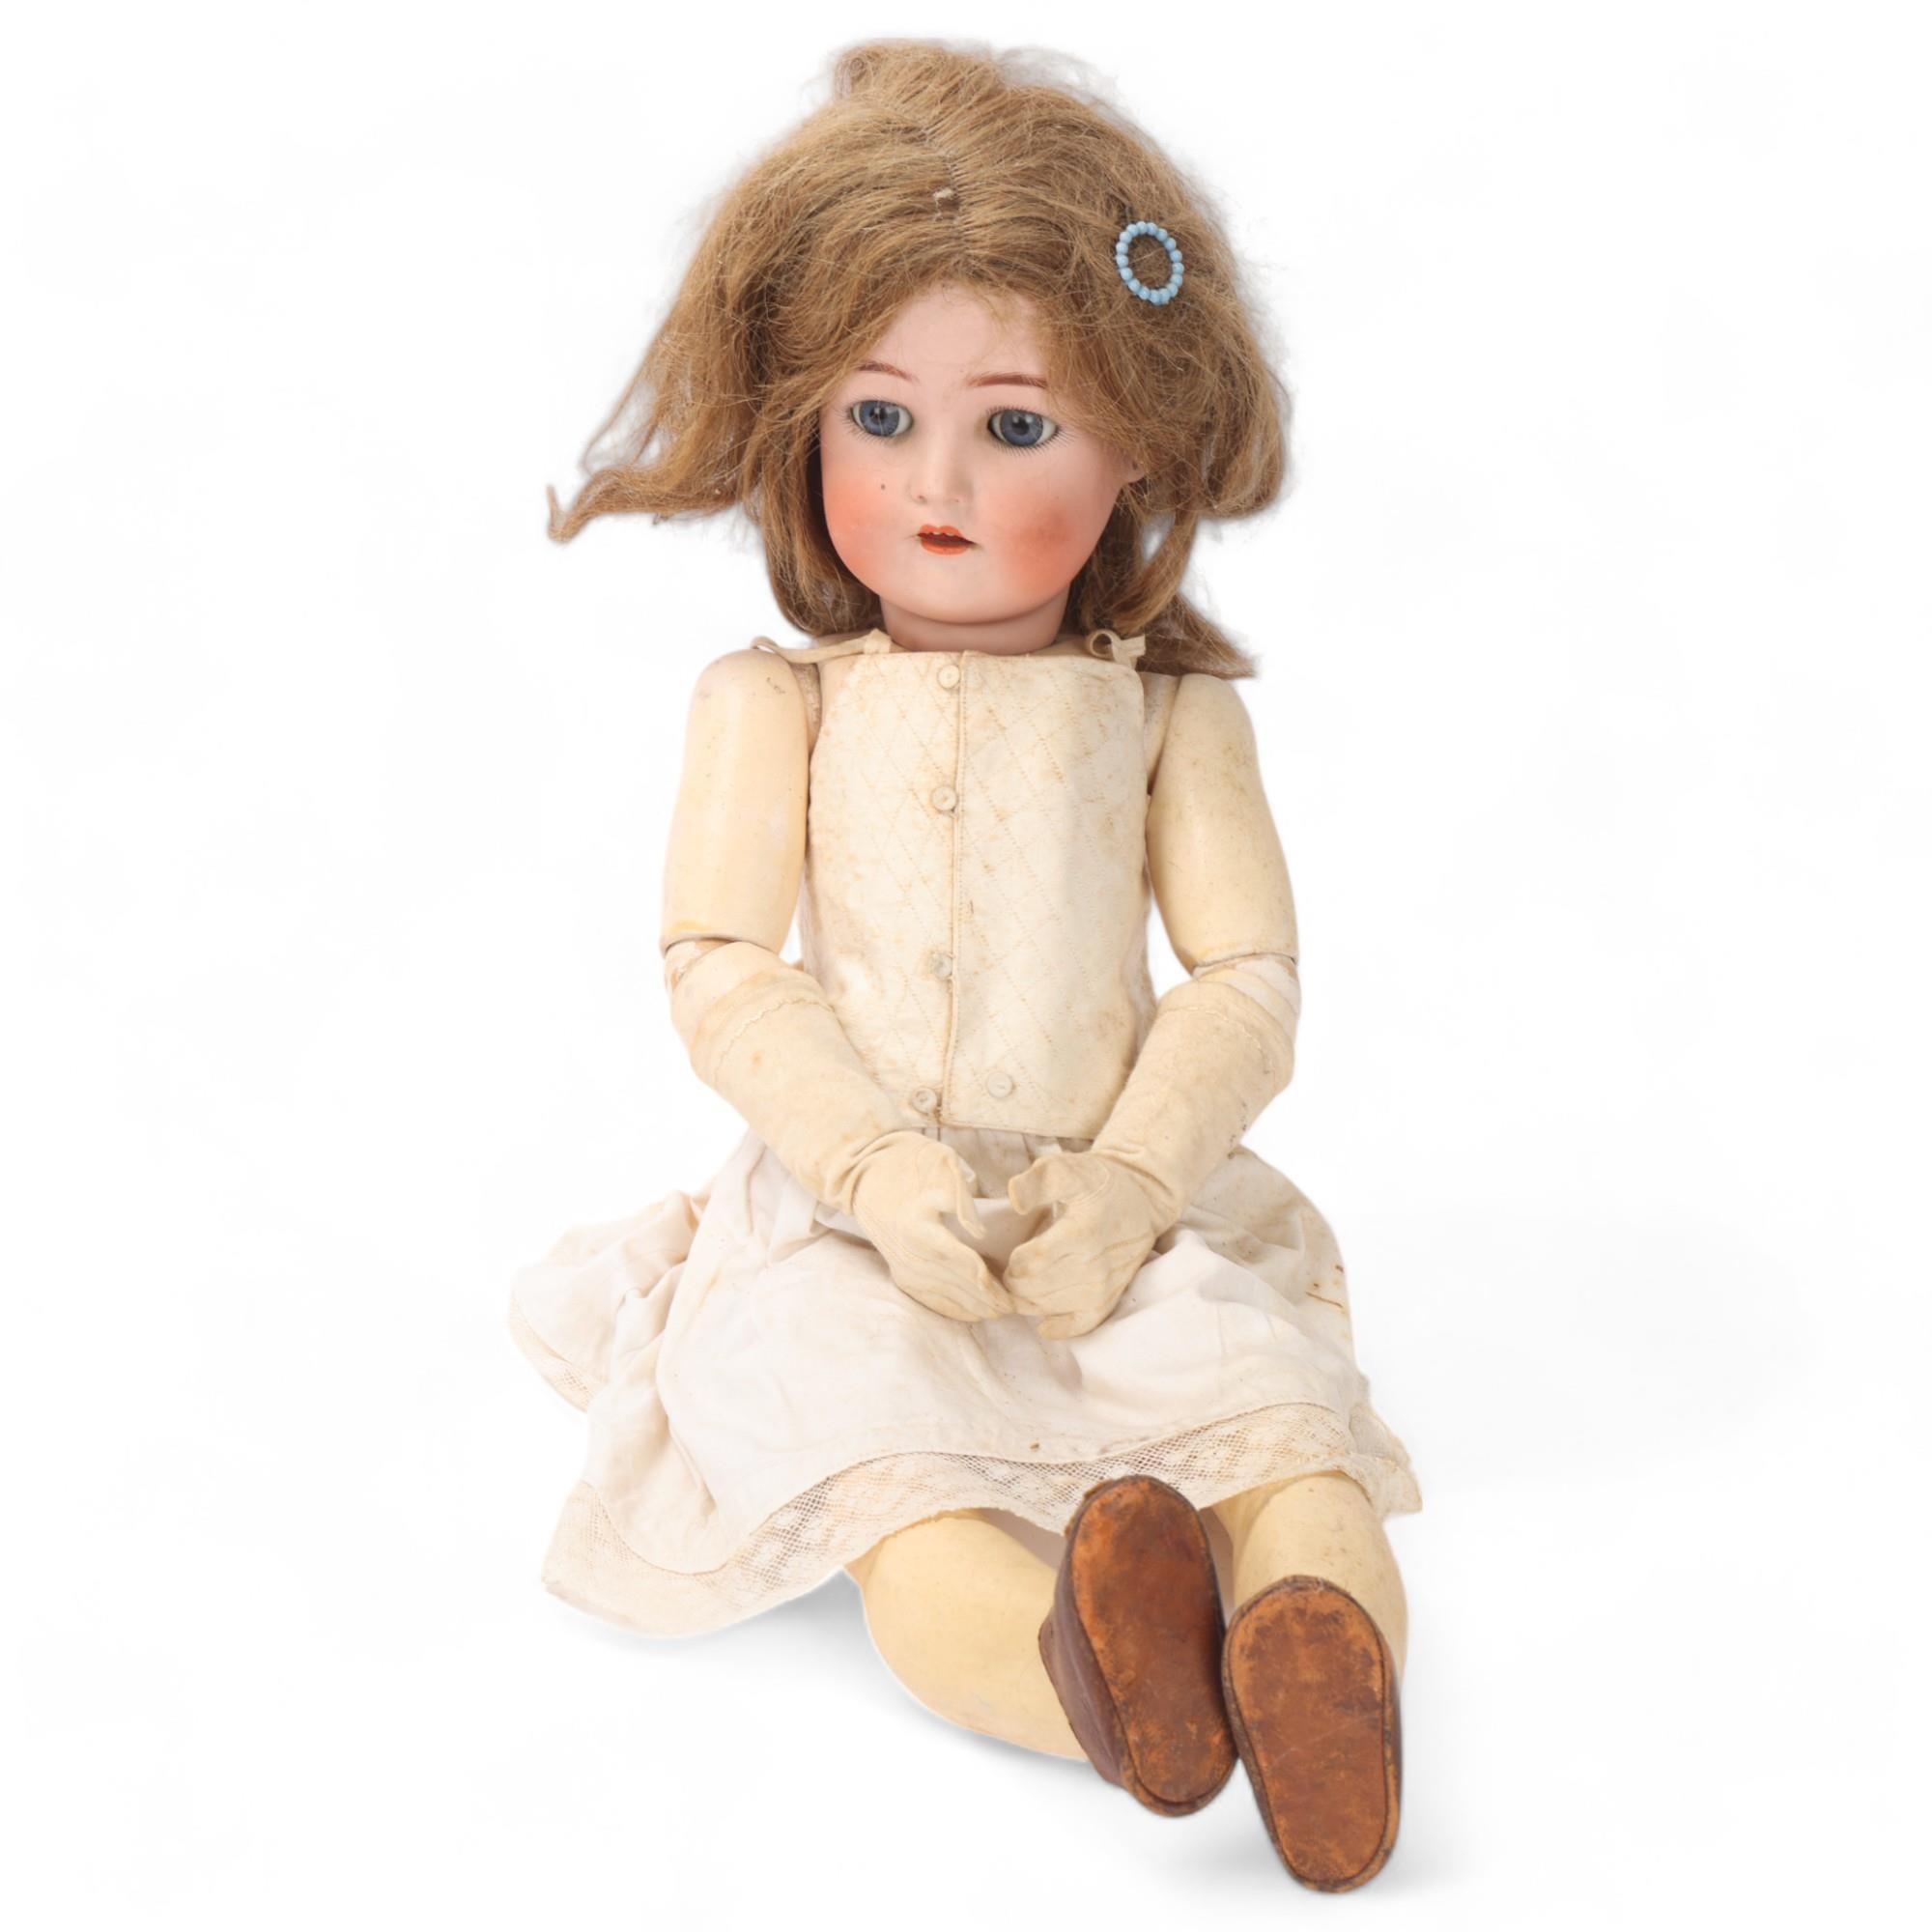 A bisque porcelain-headed girl doll, made by Kammer & Reinhardt using Simon & Halbig bisque head,